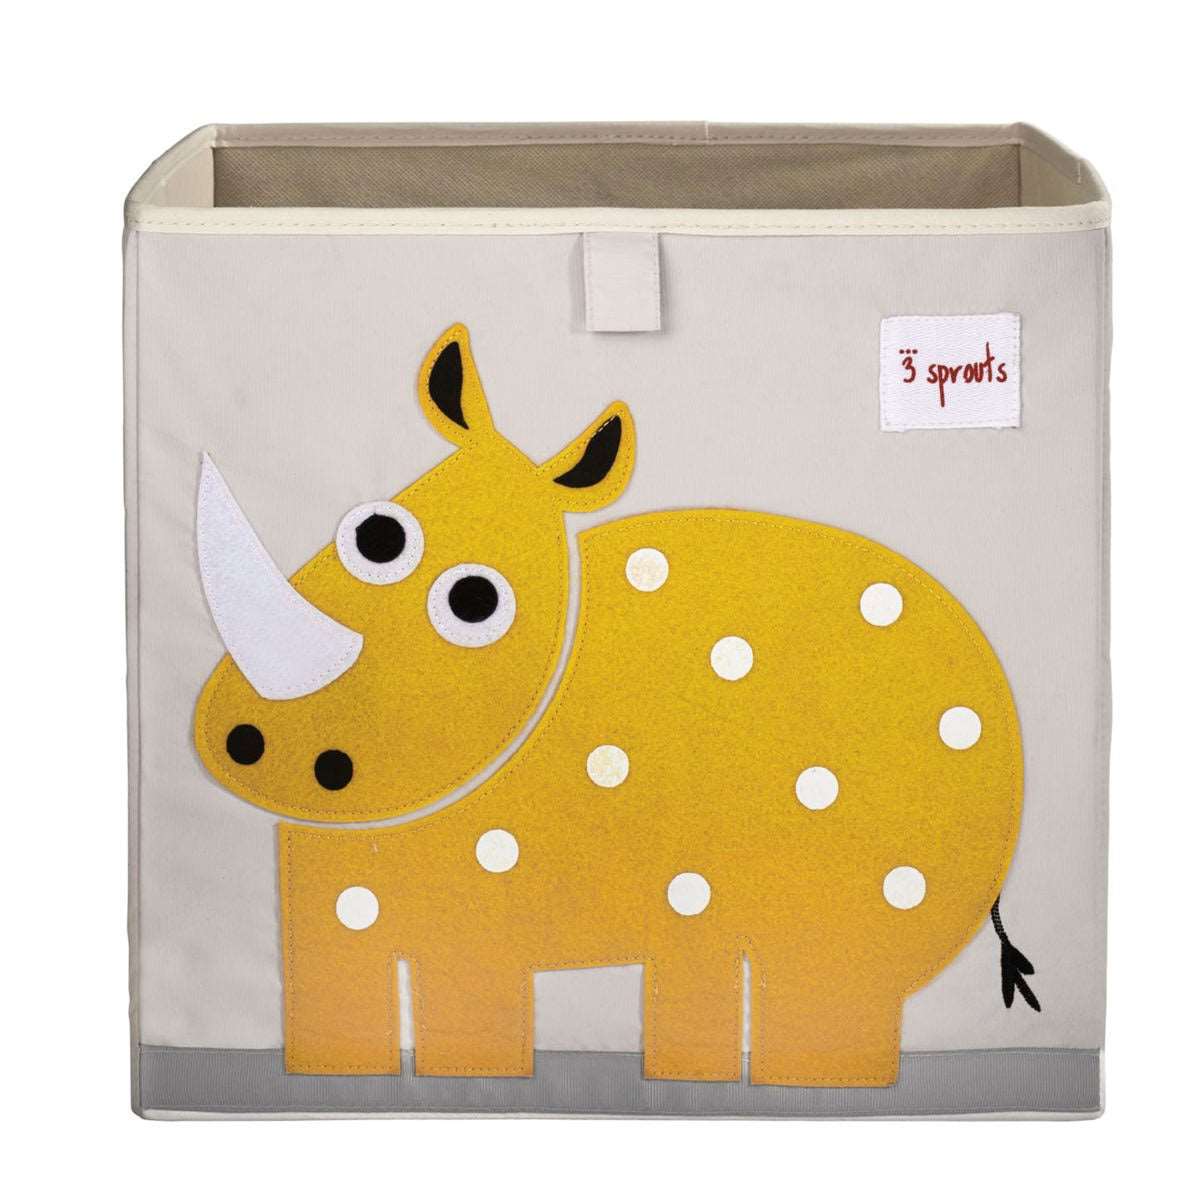 The 3 Sprouts Storage Box is the perfect organizational tool for any room. With sides reinforced with cardboard